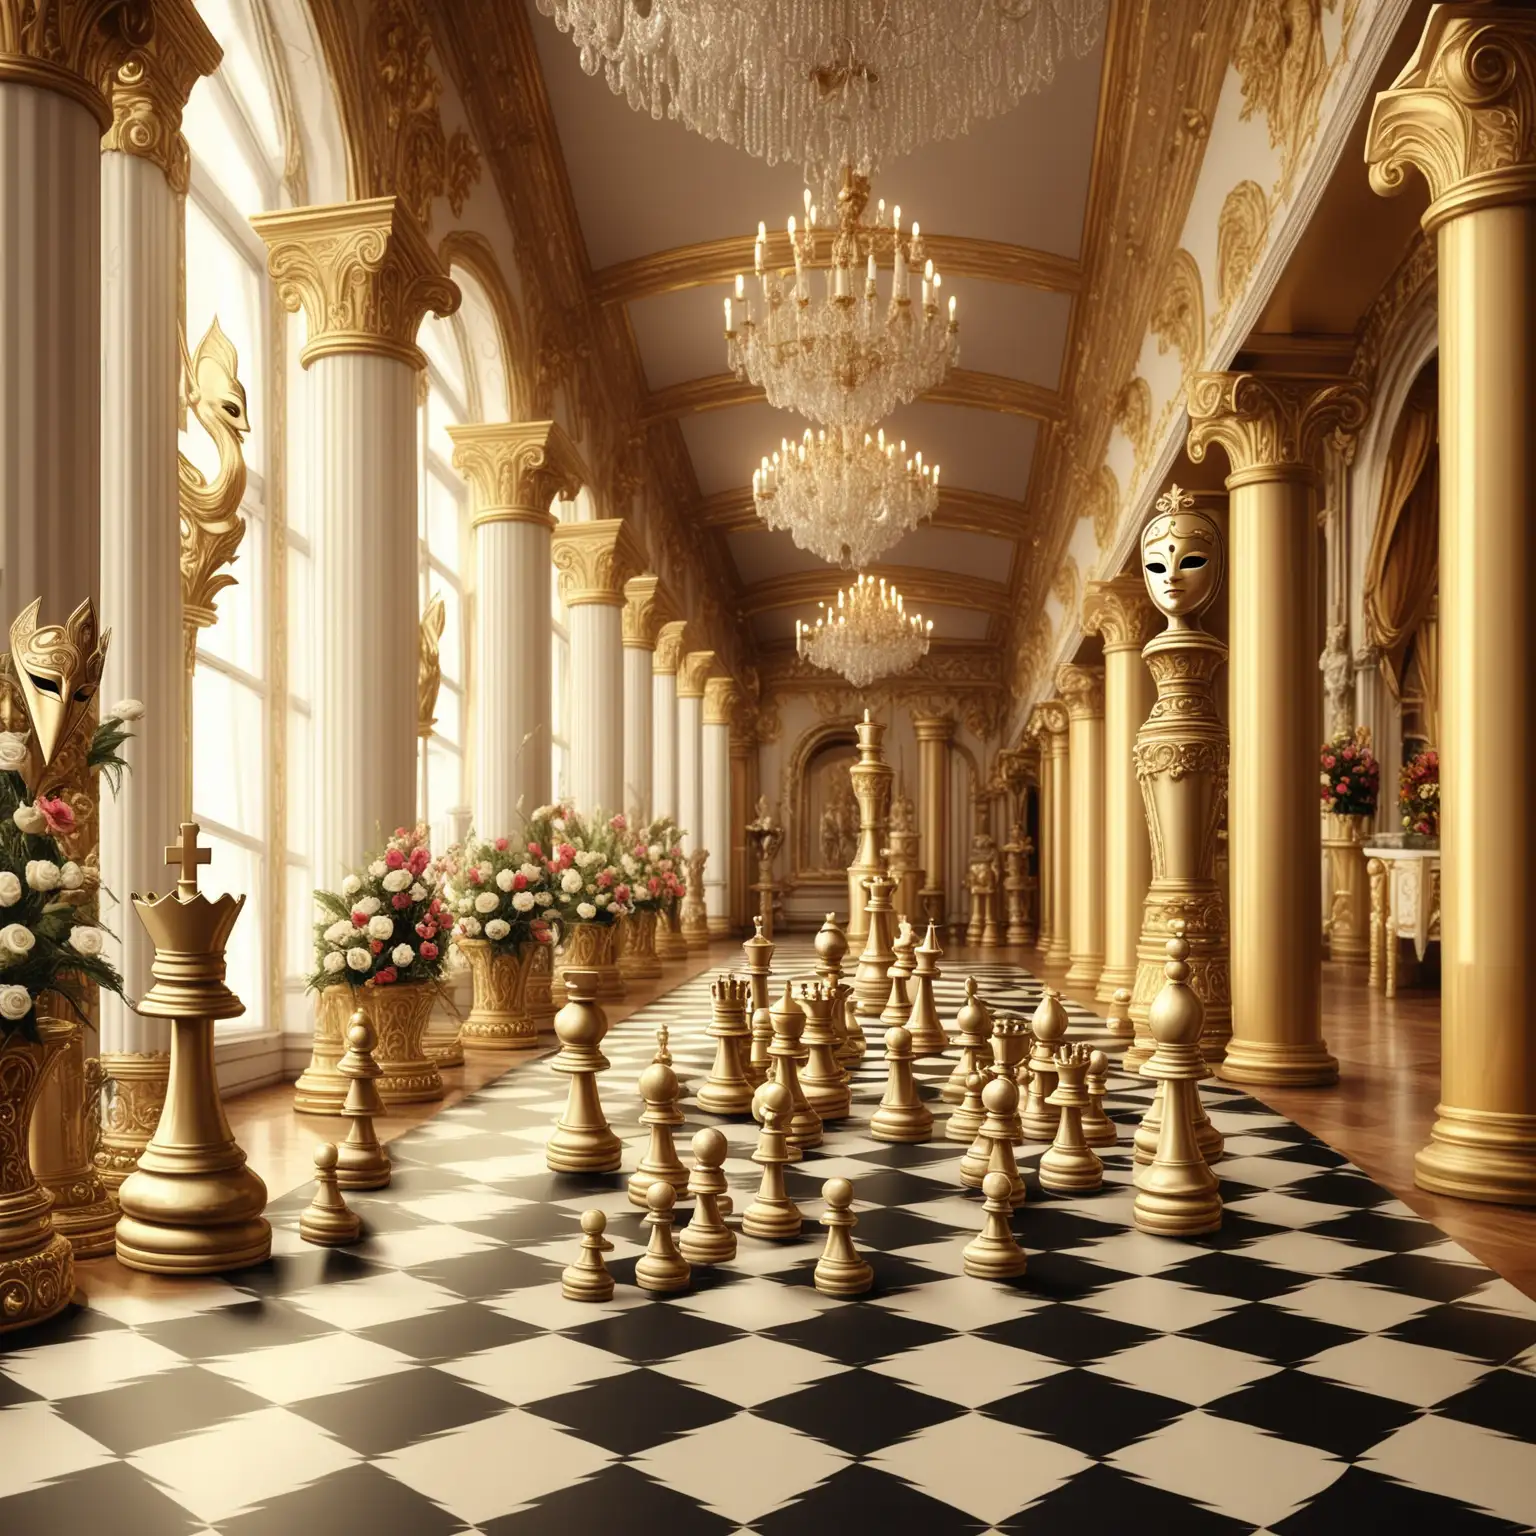 Luxurious-Hall-with-Royal-Gold-Carnival-Mask-and-Chess